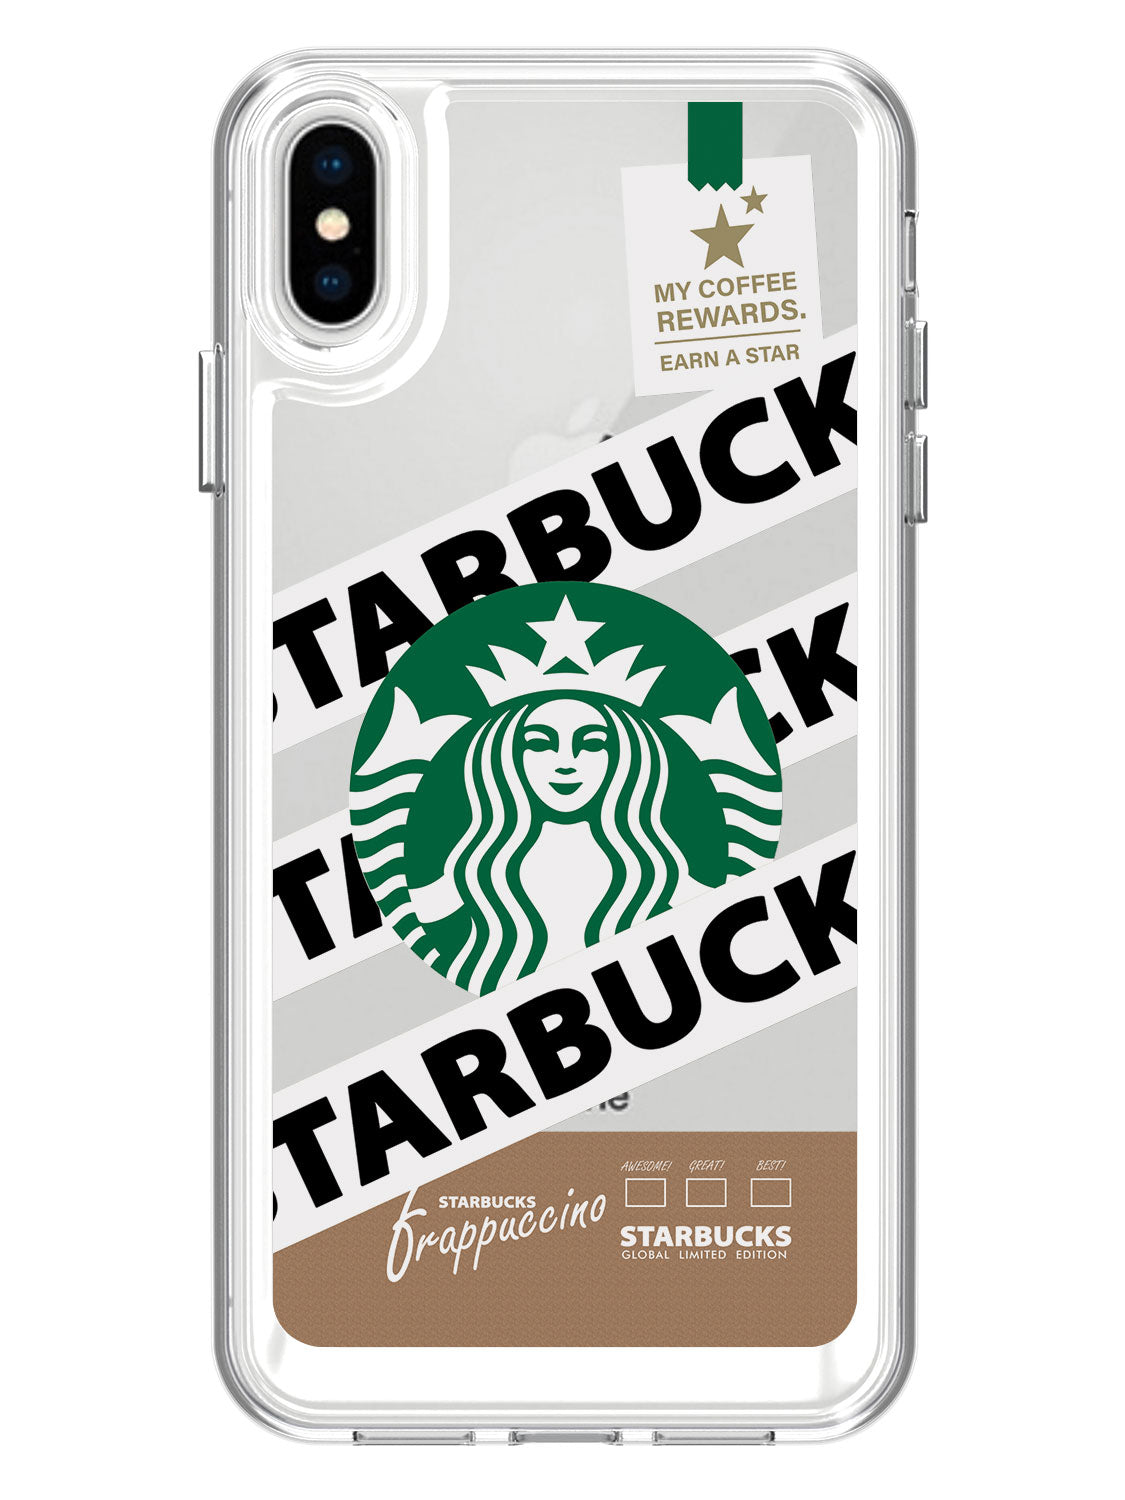 iphone xs max case cover , iphone xs max back cover , iphone xs max back cover hard case